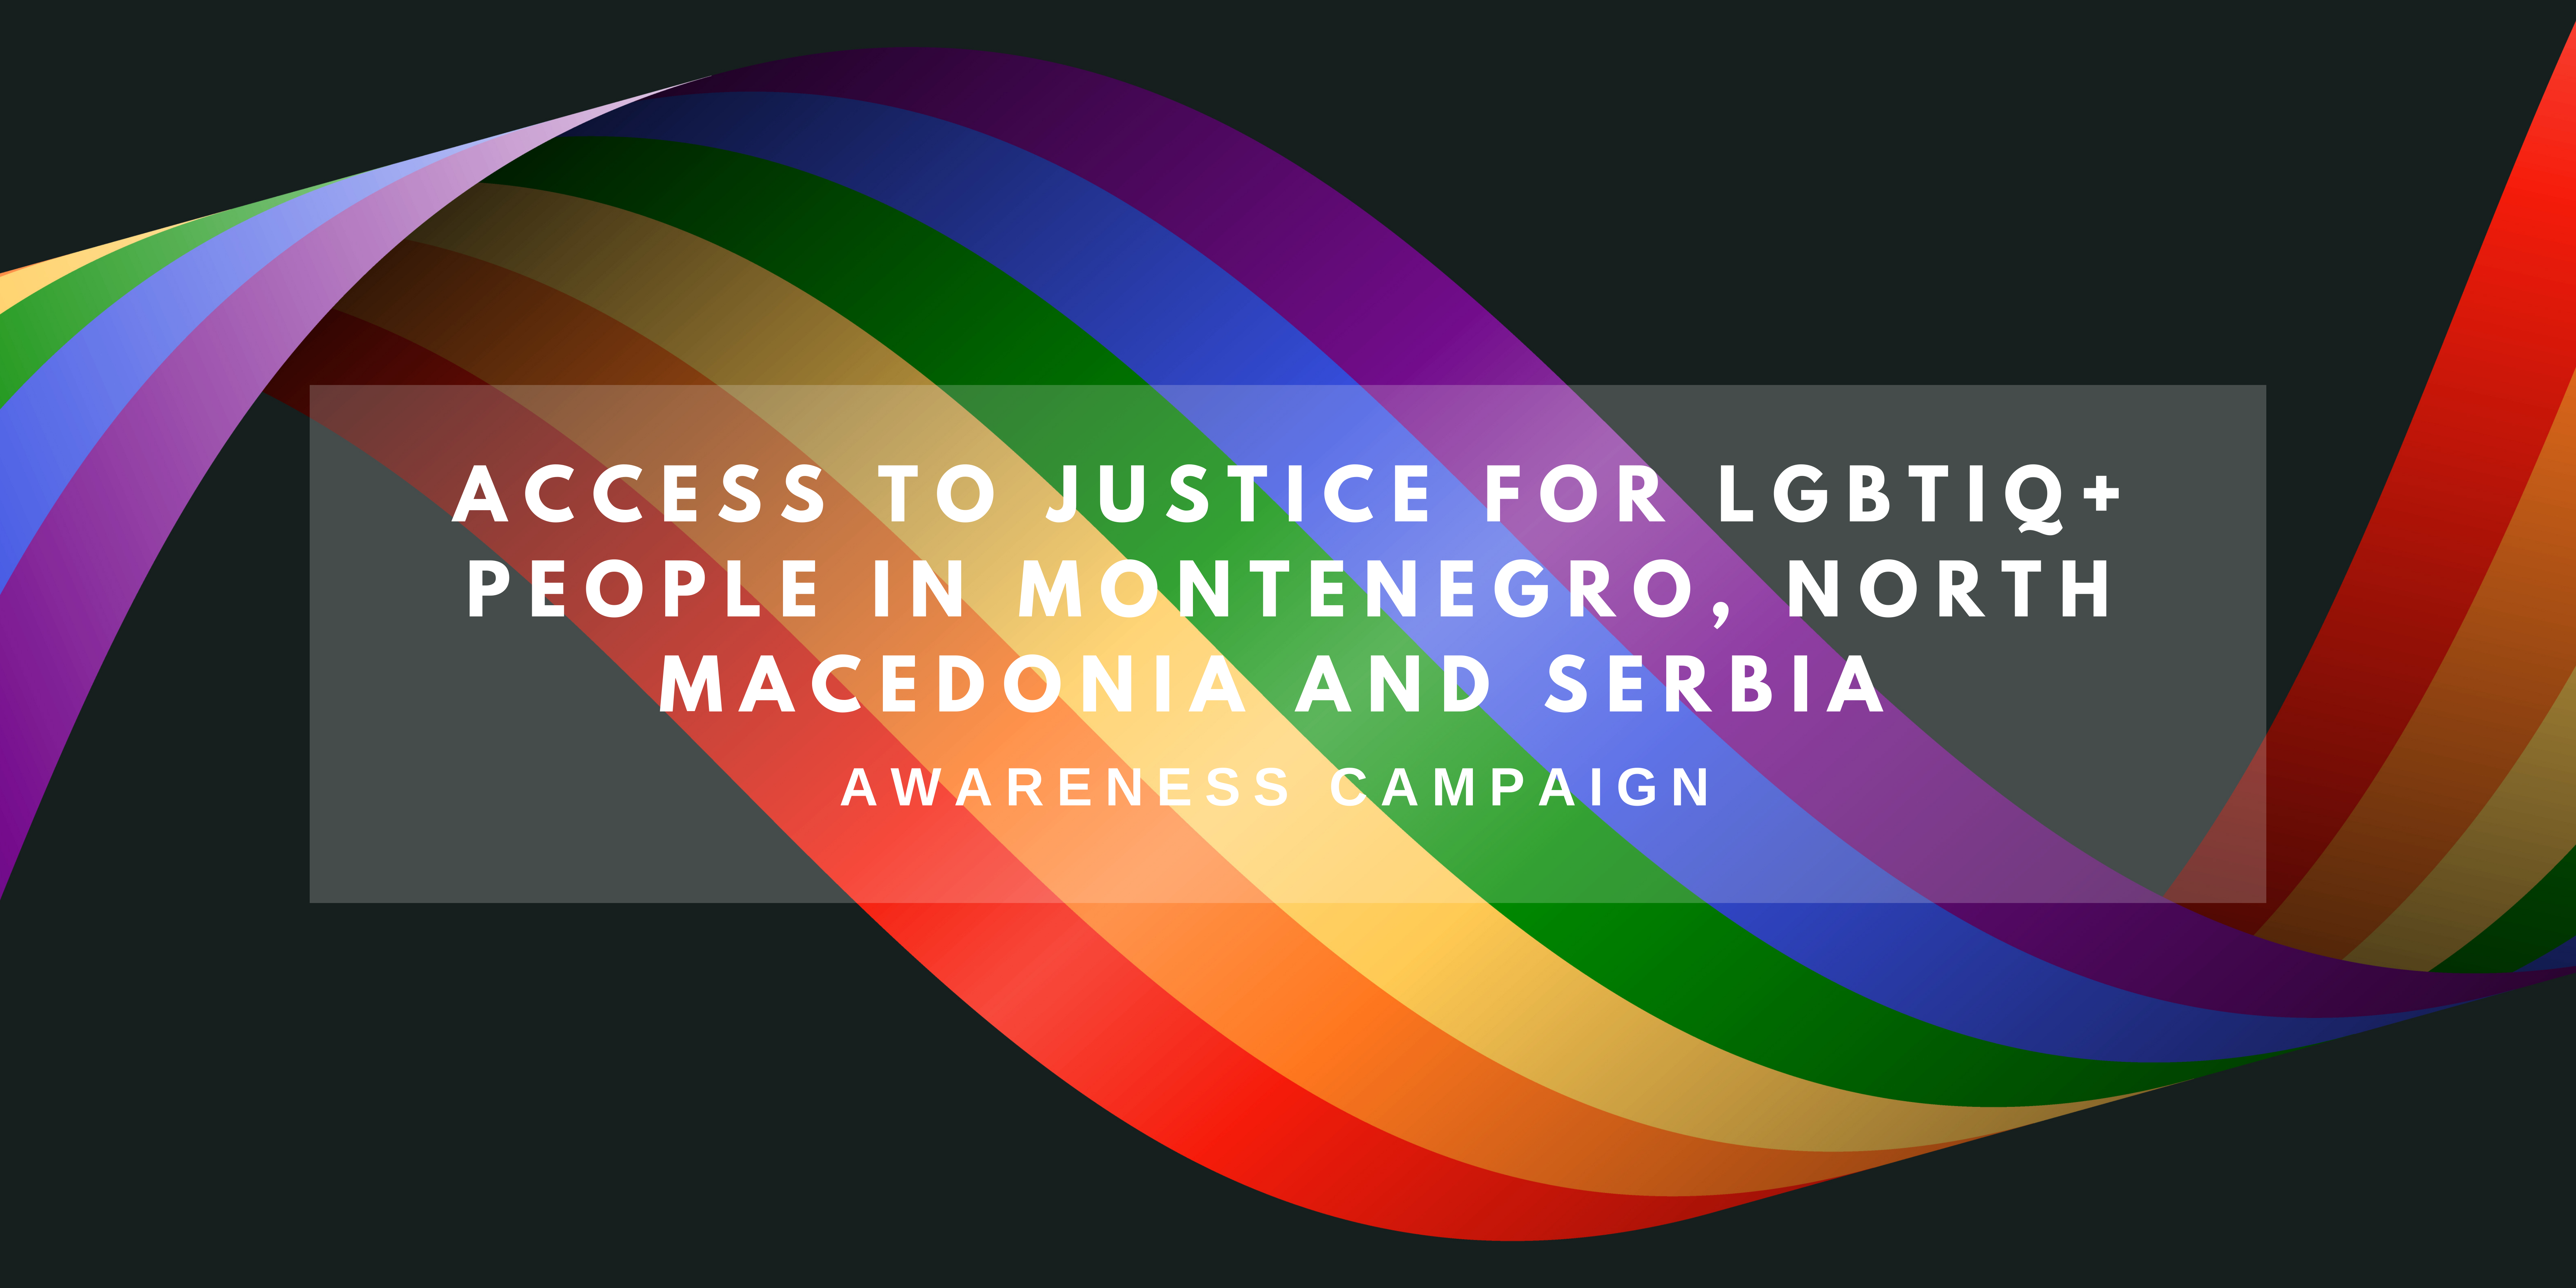 ERA - News - A regional awareness campaign to address LGBTIQ+ people’s access to justice in Montenegro, North Macedonia and Serbia